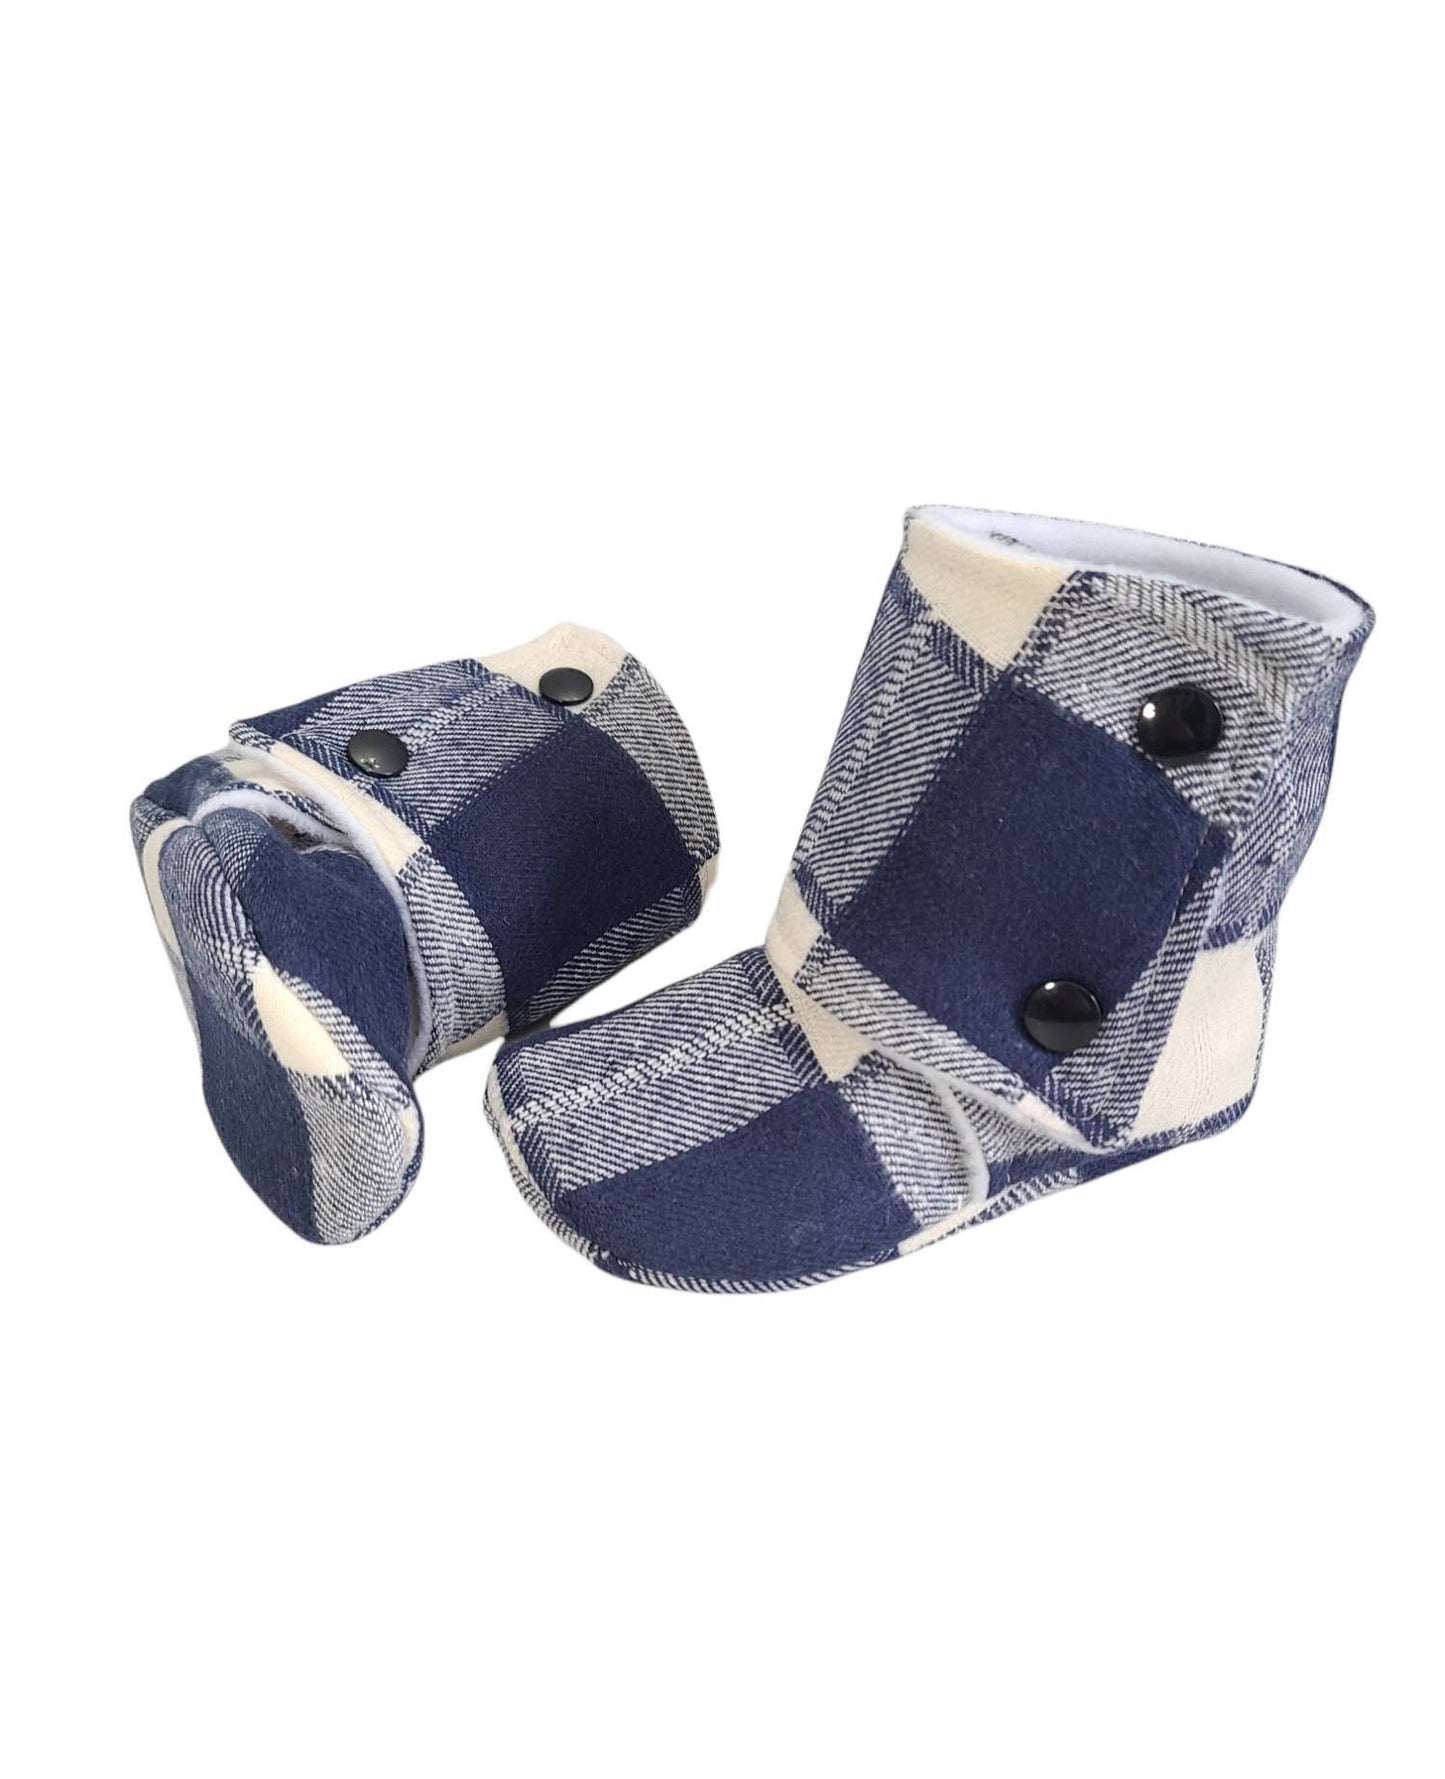 Navy Blue Buffalo Plaid Baby Booties, Baby Gift, Navy Blue Stay-on Boots, Fabric Baby Boots, Navy Buffalo Plaid Baby Boots, Stay-on Booties